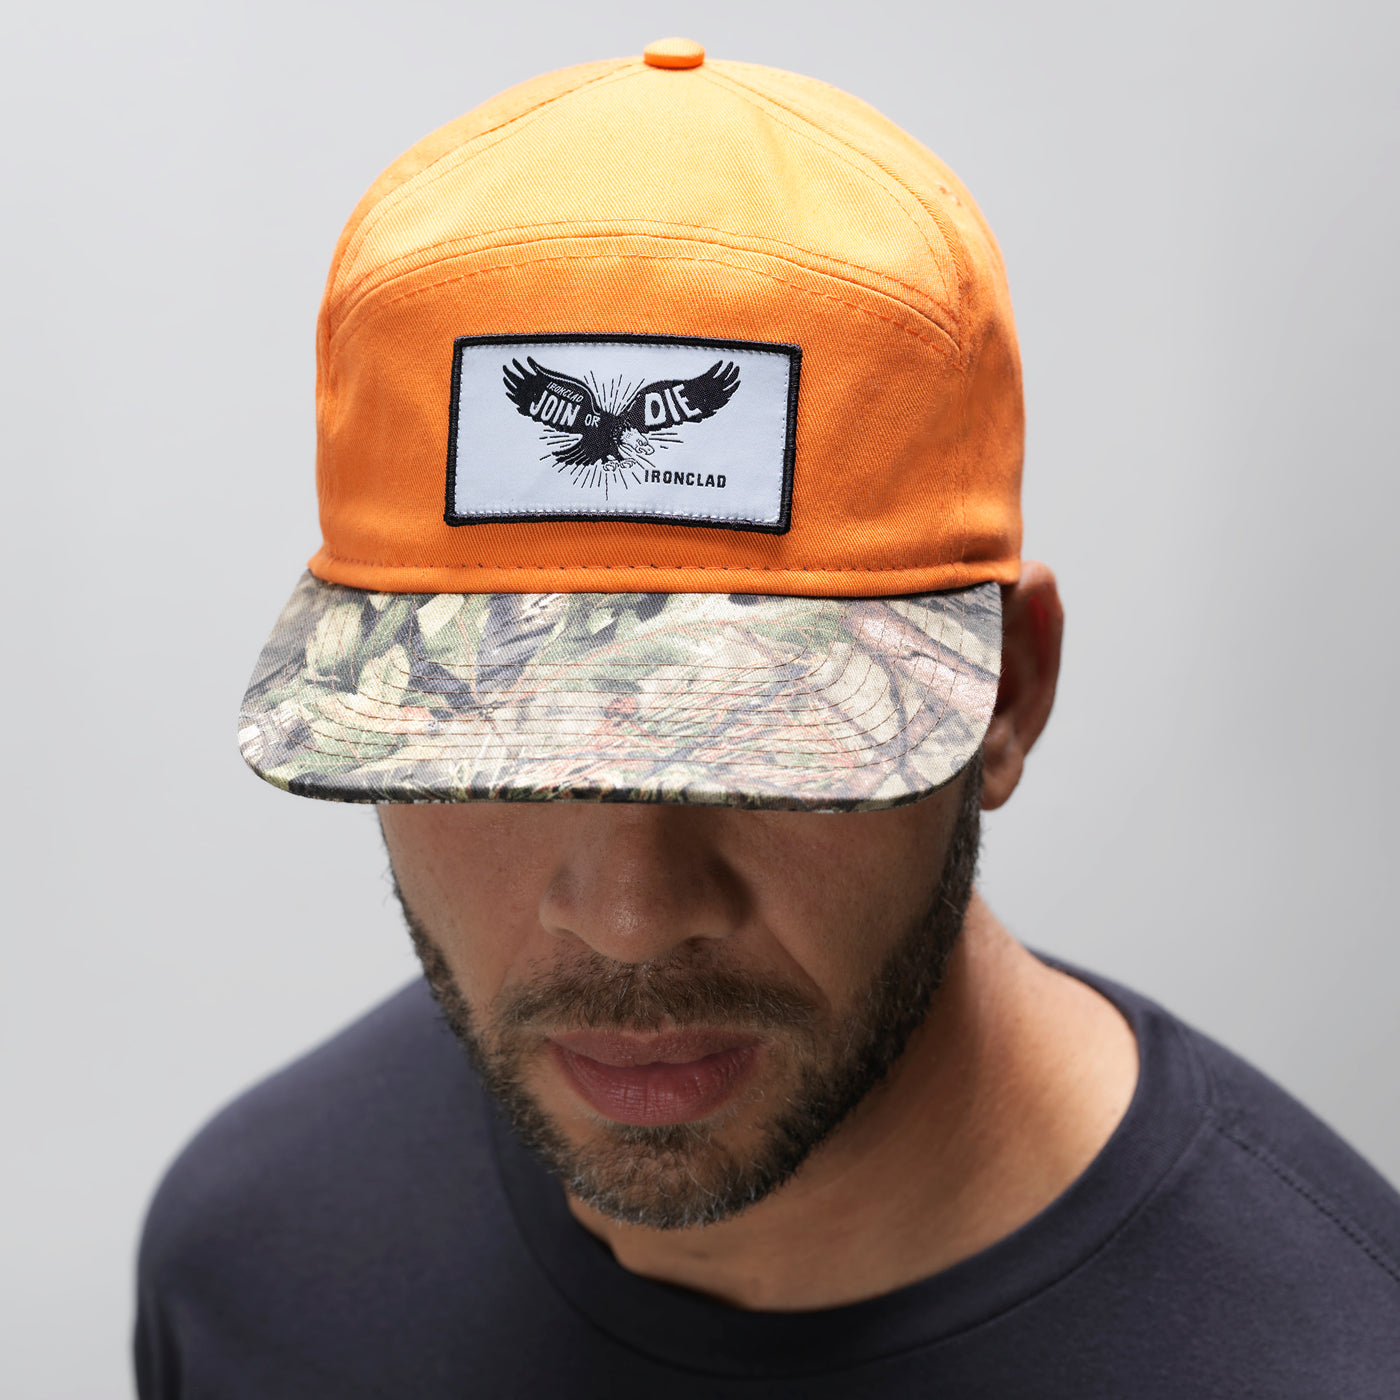 JOIN OR DIE TRADESMAN HAT